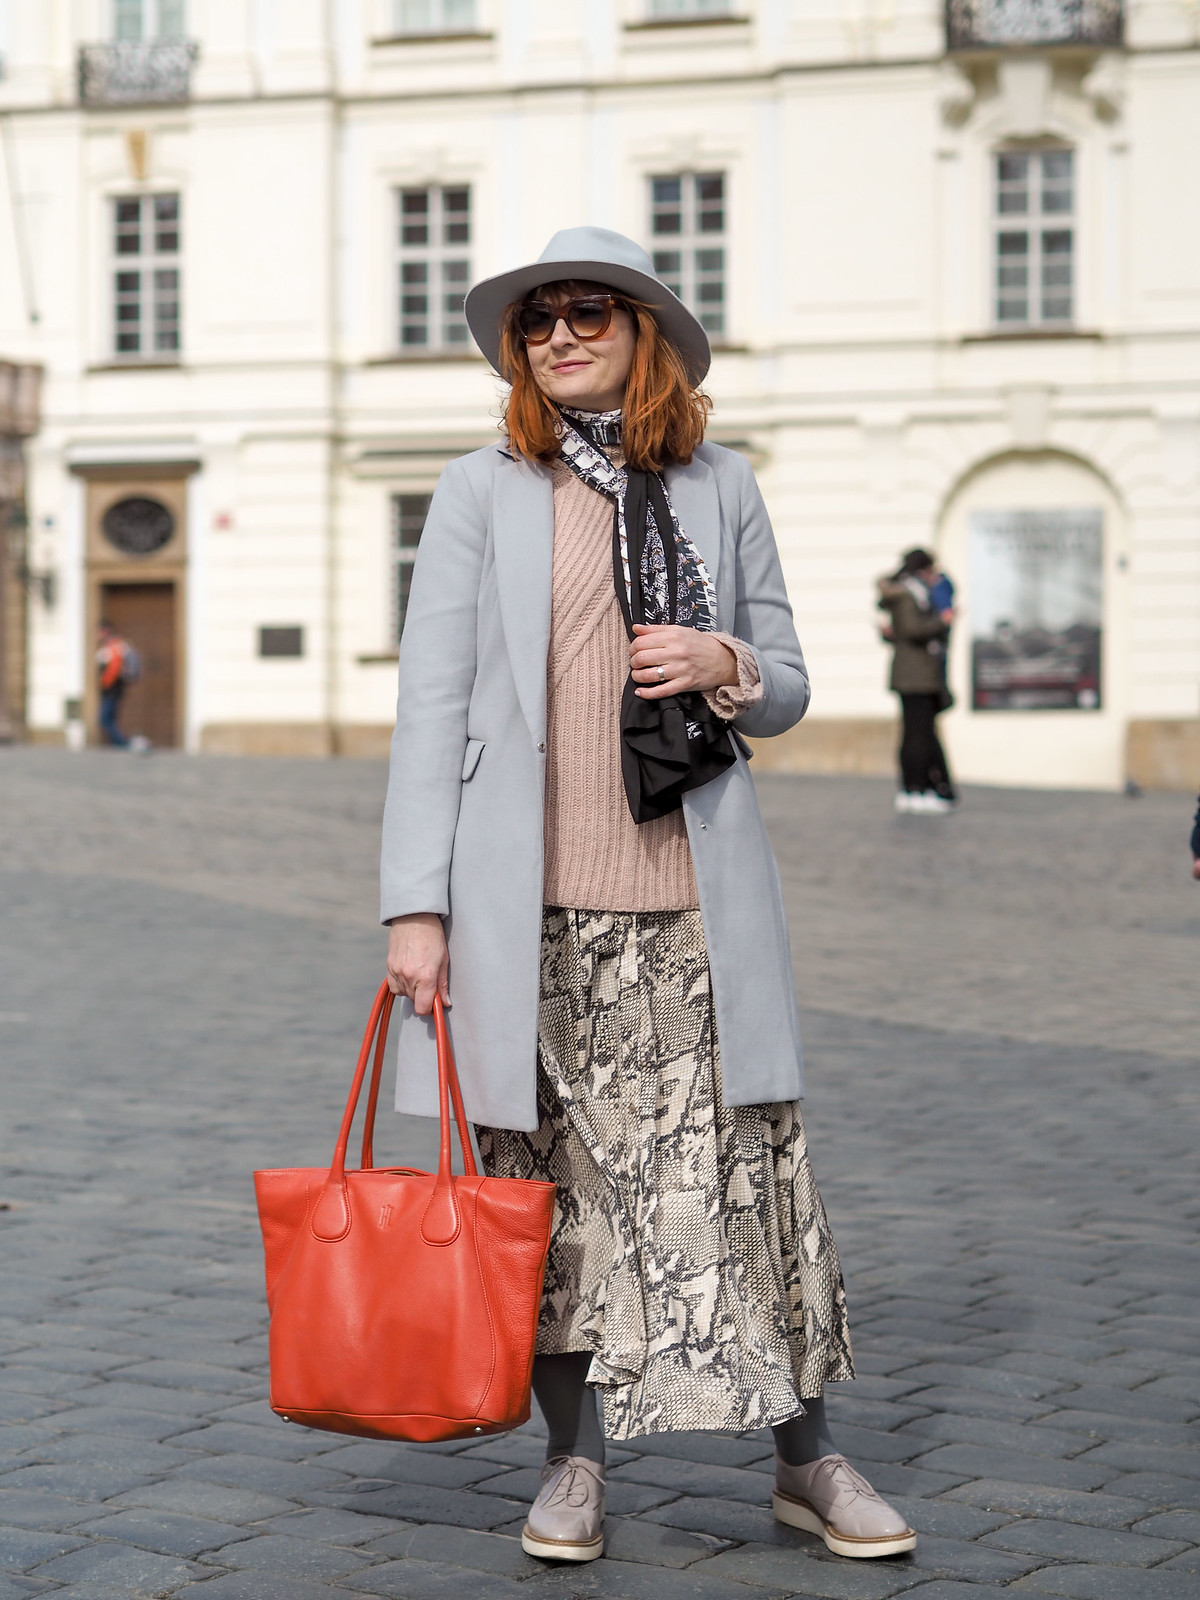 Over 40 Style: What to Wear for a European Sightseeing Break (in Prague) | Not Dressed As Lamb